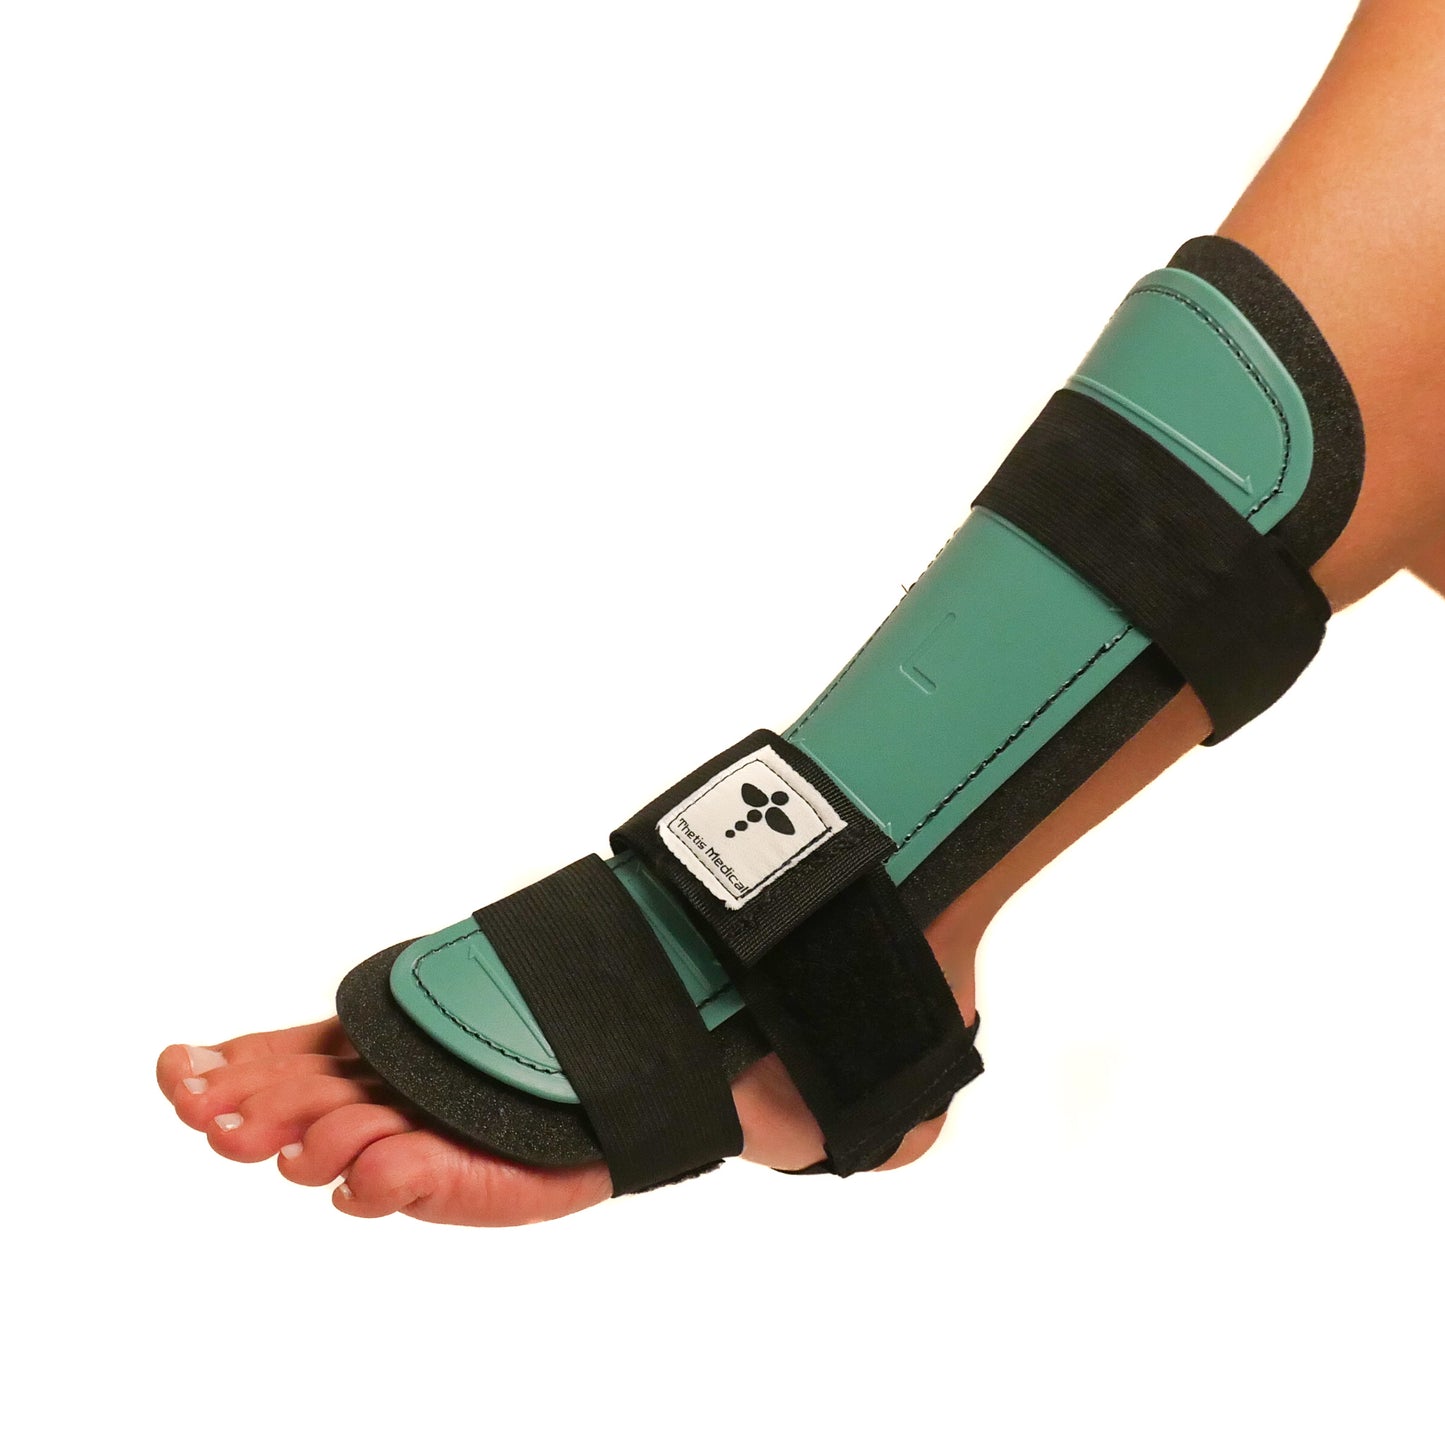 Thetis Medical Achilles Rupture Splint from side with white background